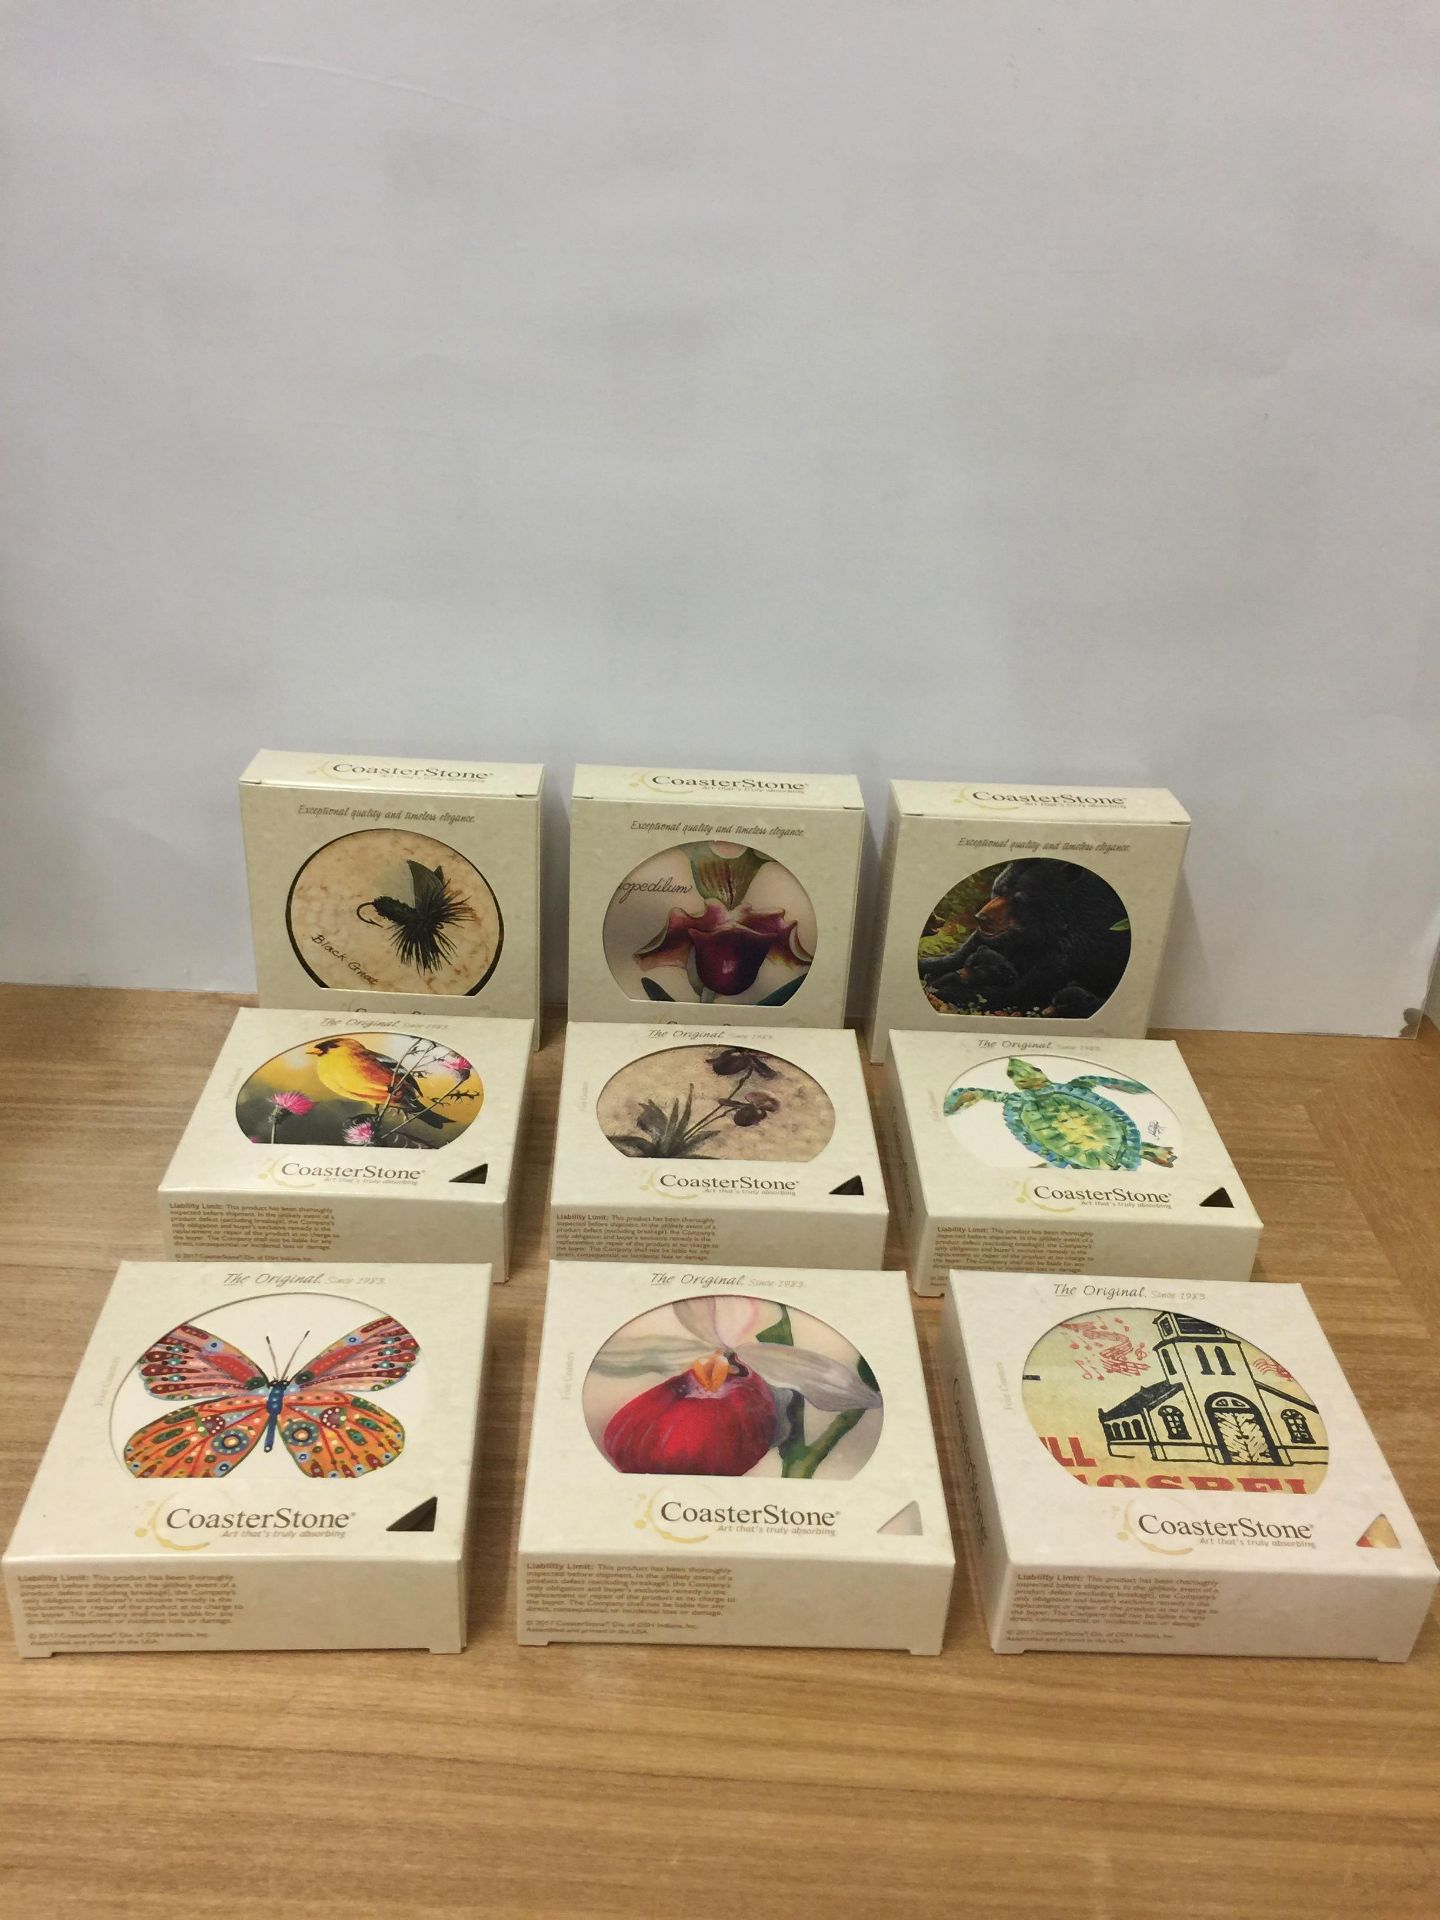 Brand New CoasterStone Absorbent Coasters (Set of 9)